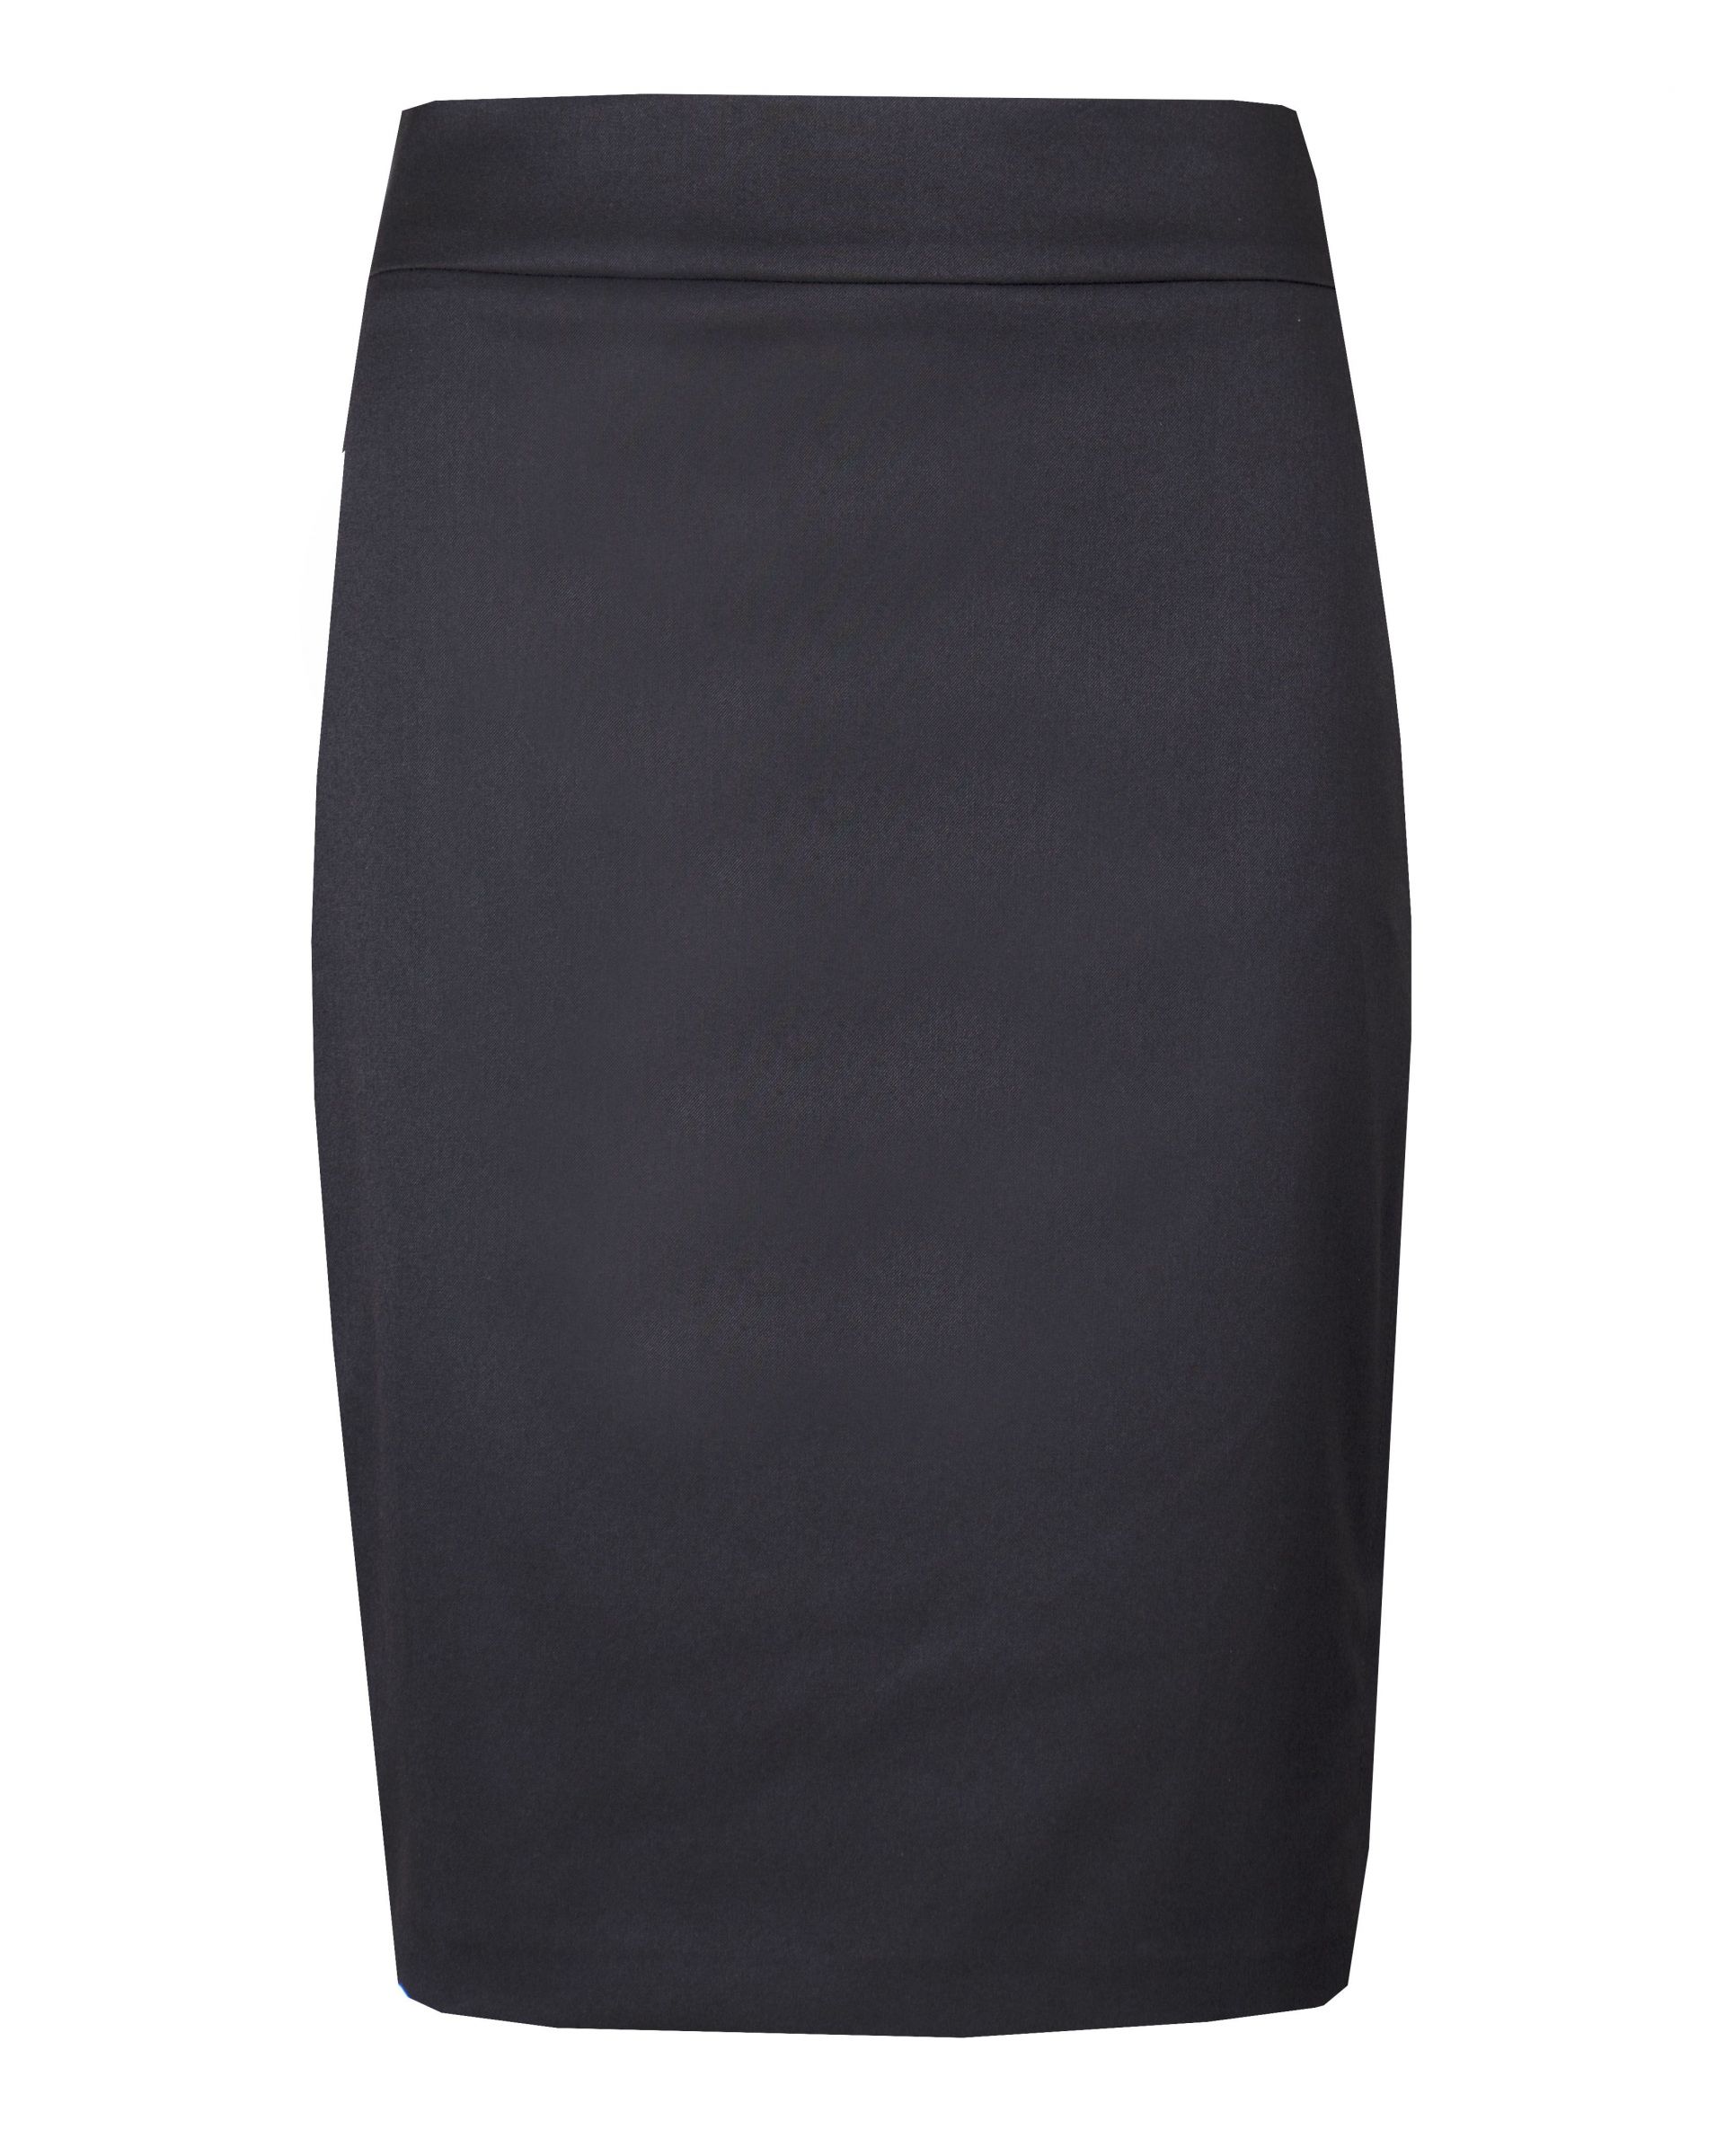 Pencil skirt with lace detail slit 1